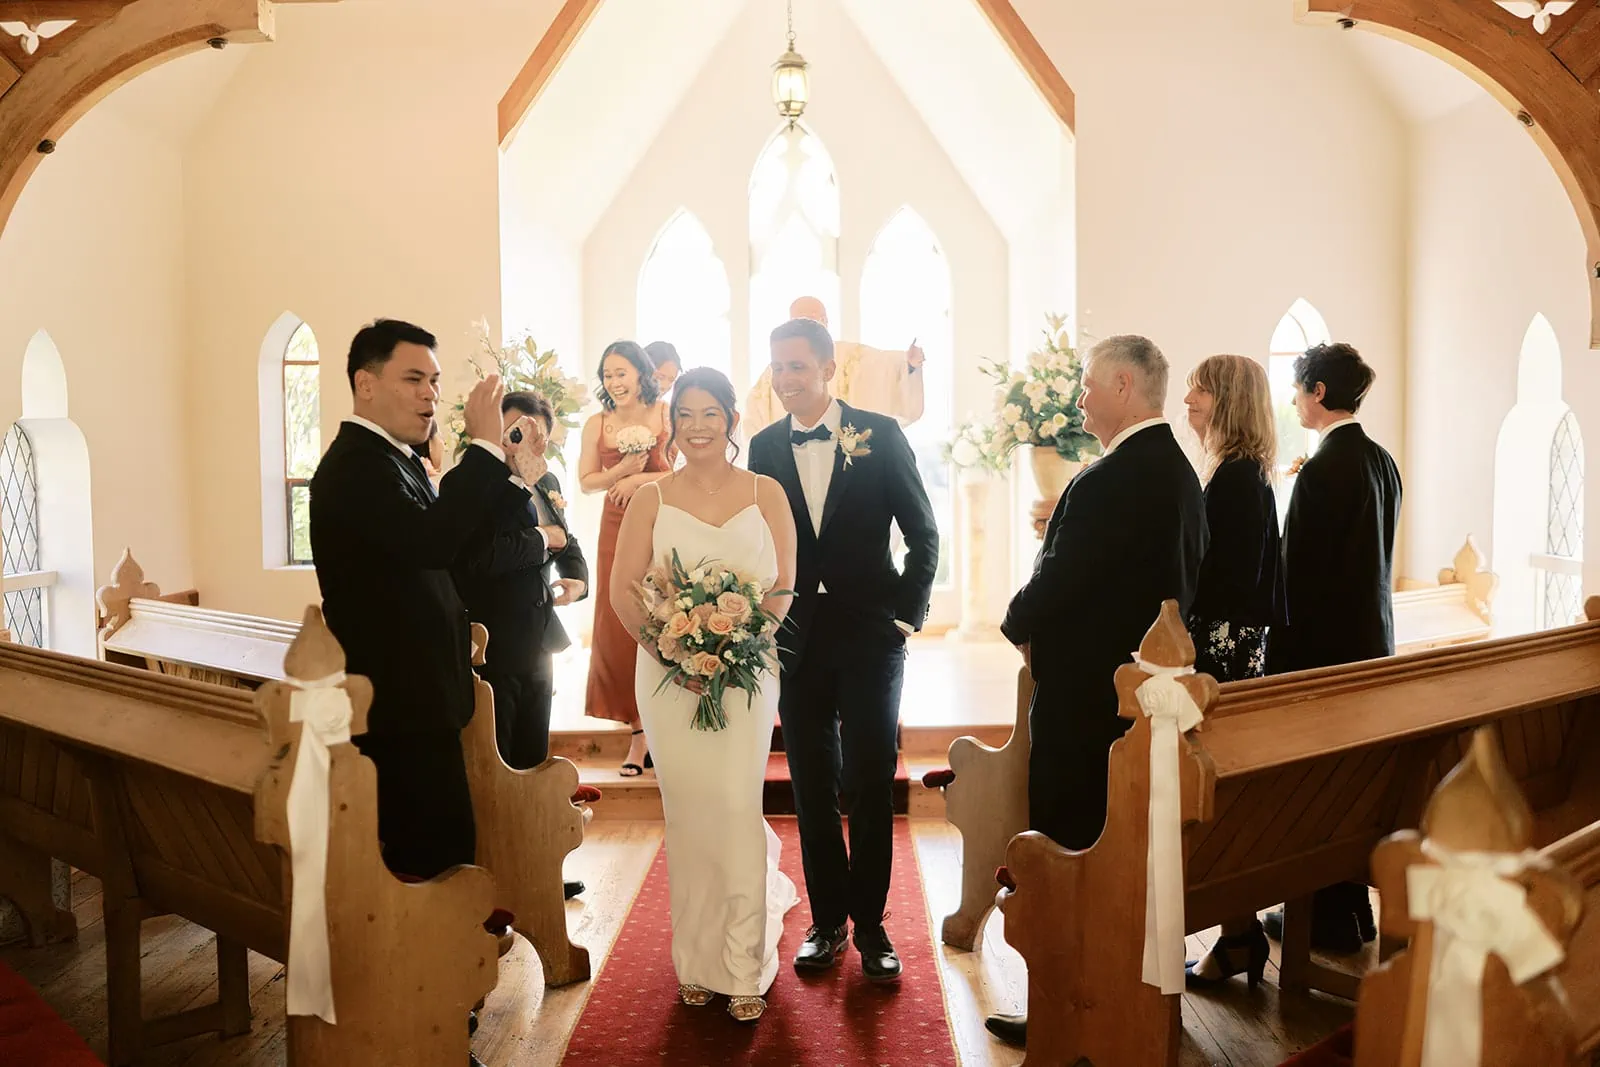 Queenstown Elopement Heli Wedding Photographer クイーンズタウン結婚式 | Shane and MJ, the bride and groom of the Stoneridge Queenstown Wedding, gracefully walk down the aisle of a charming church.